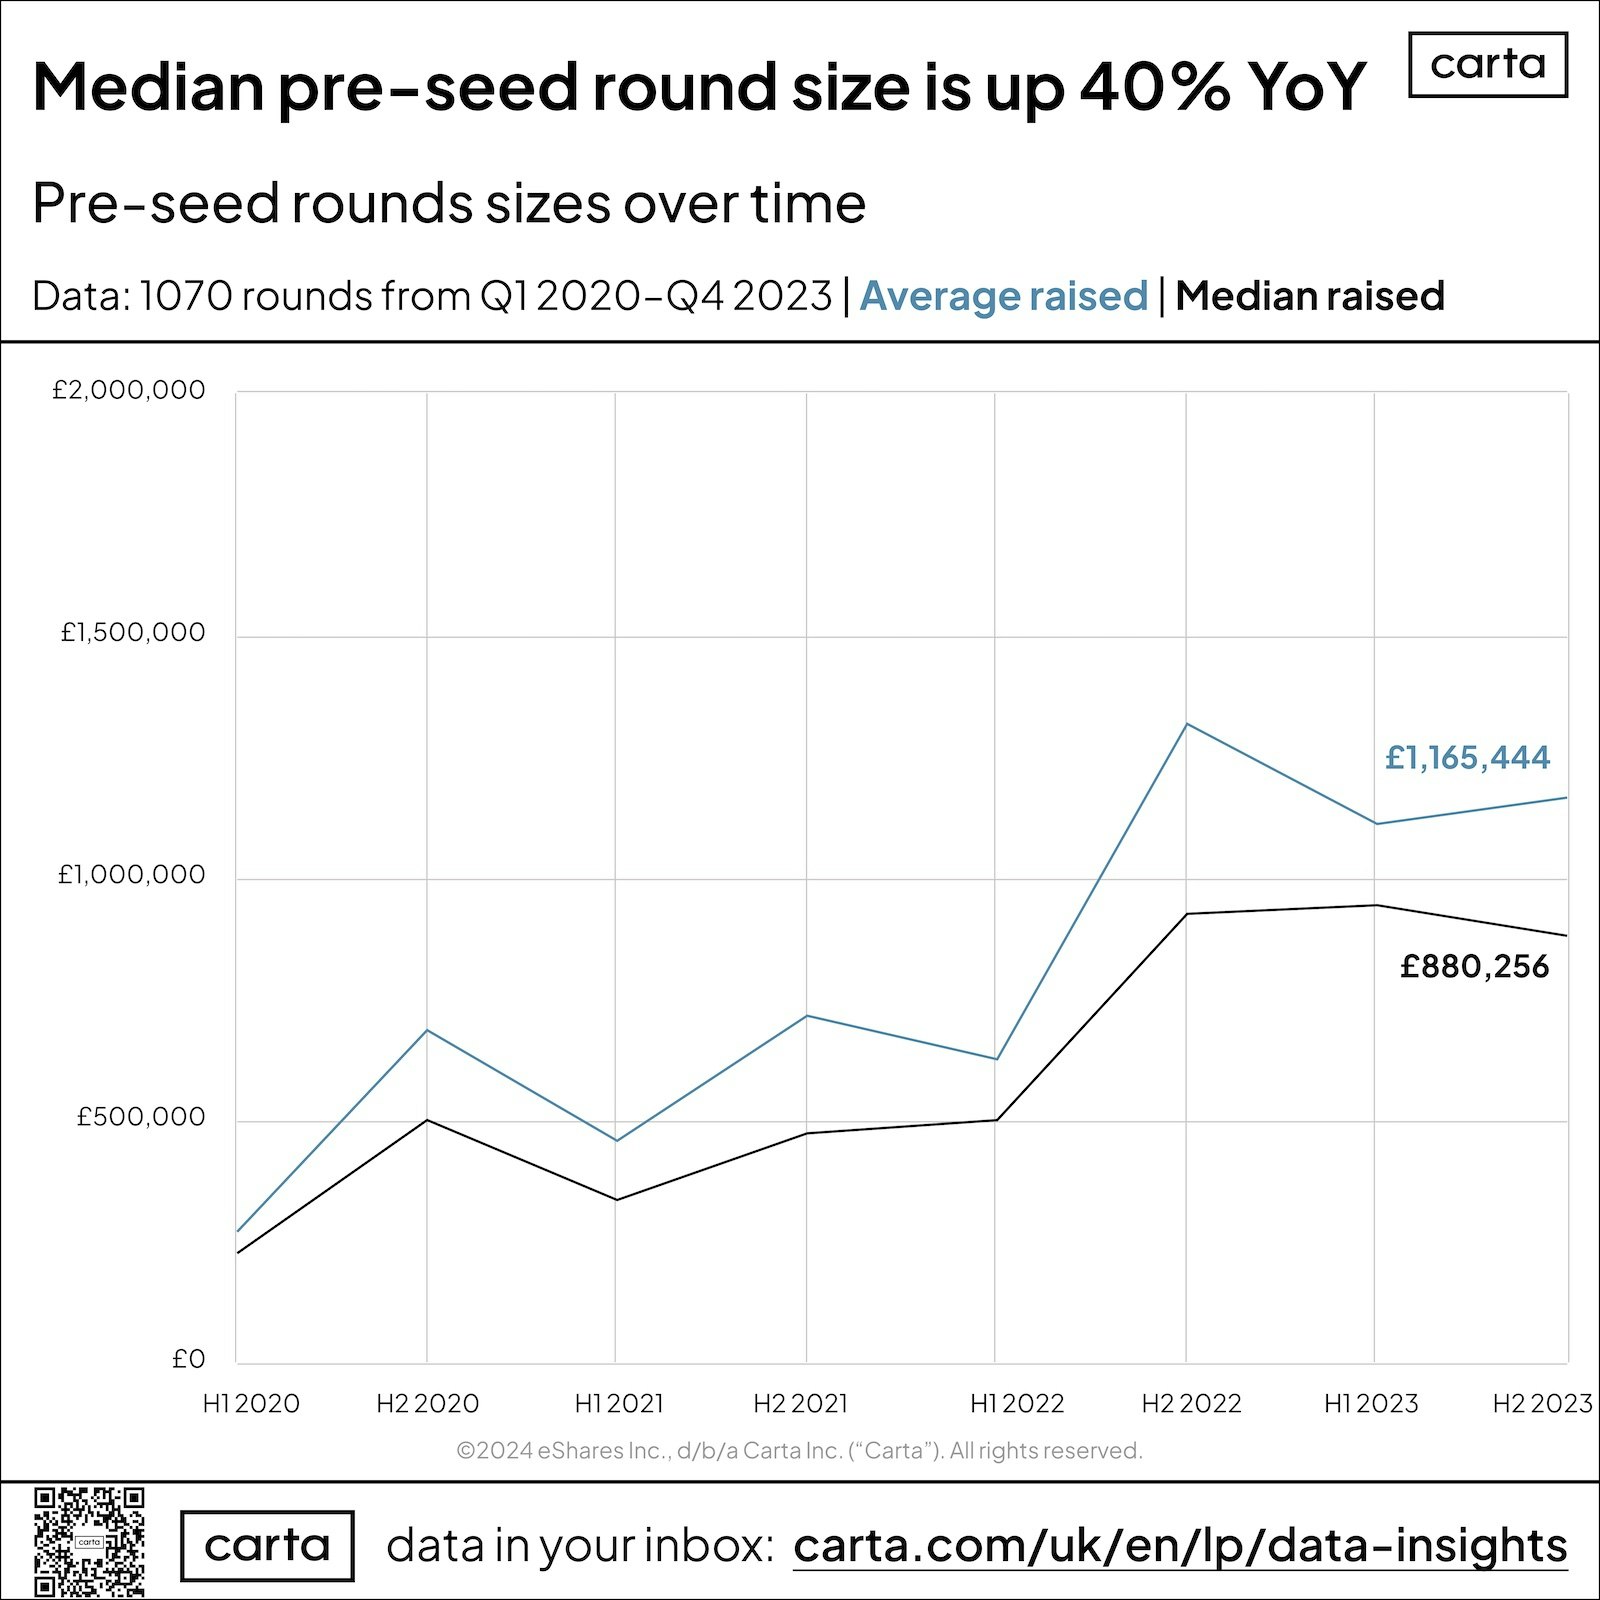 A chart from Carta showing the median and average seed round size from 2020 to 2023. 